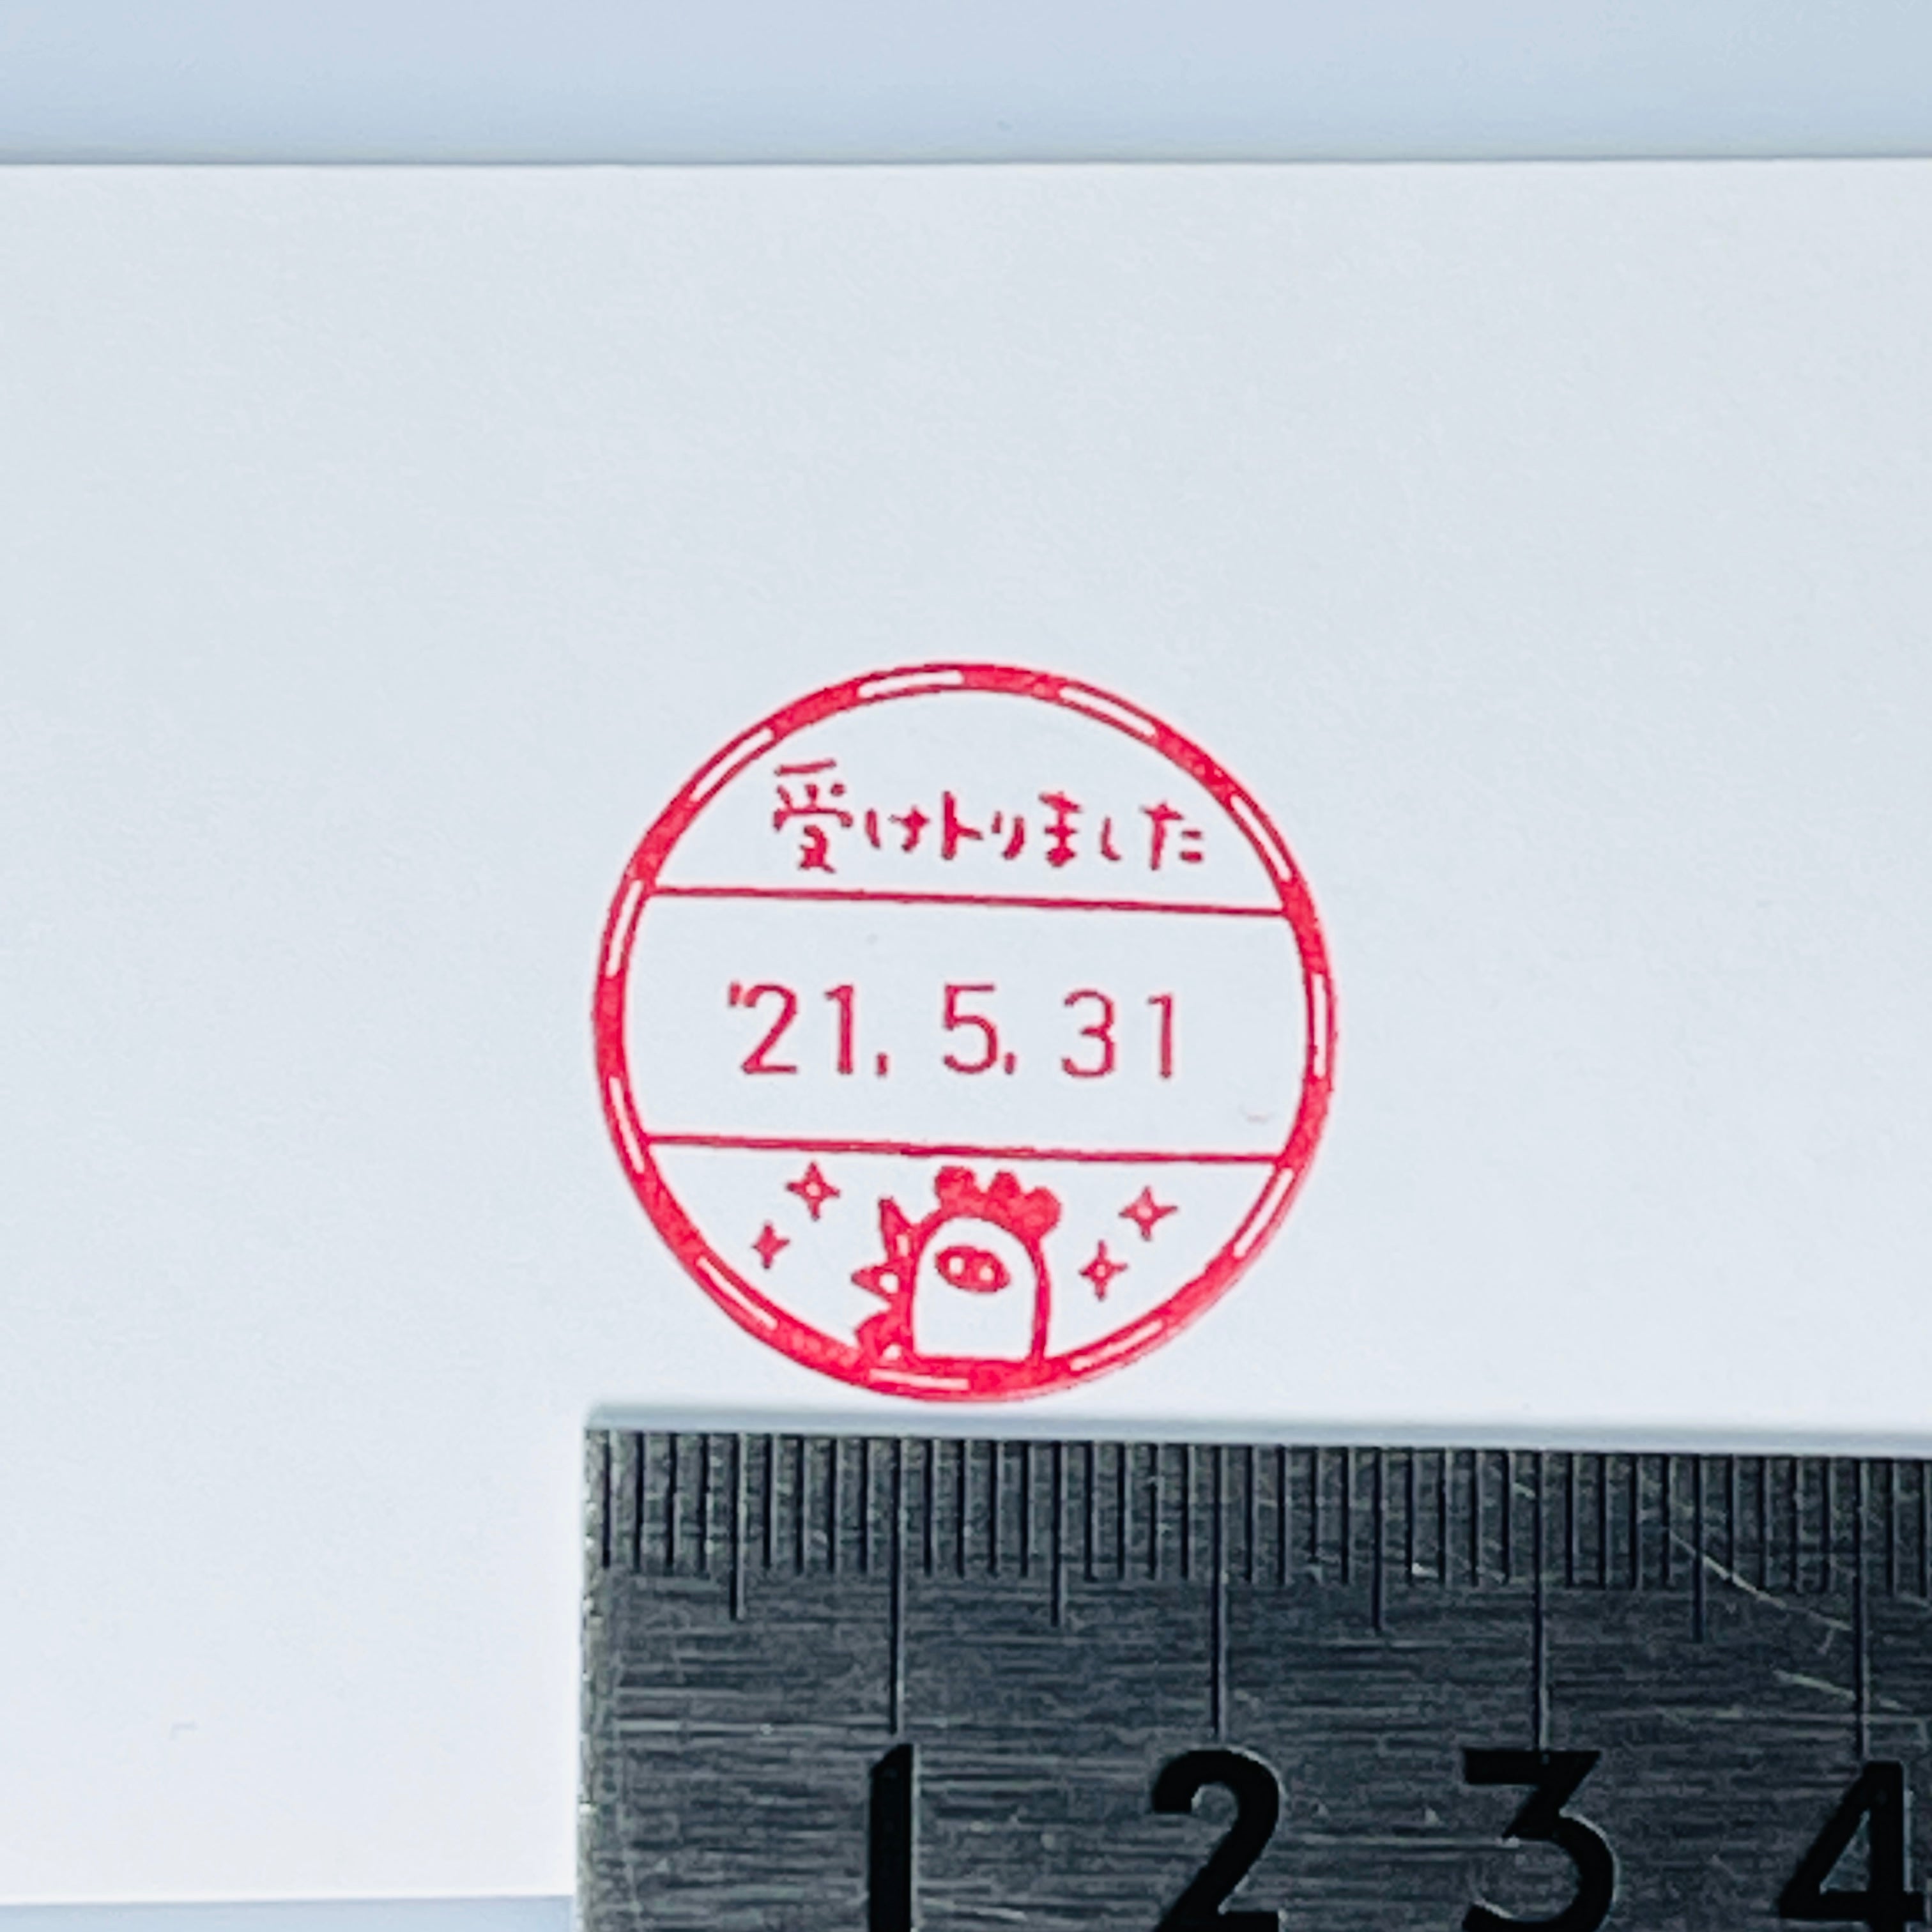 Rotating Date Stamp With Adjustable Dials "Kokkeko Teacher - Received" (No. 8 Circle)*